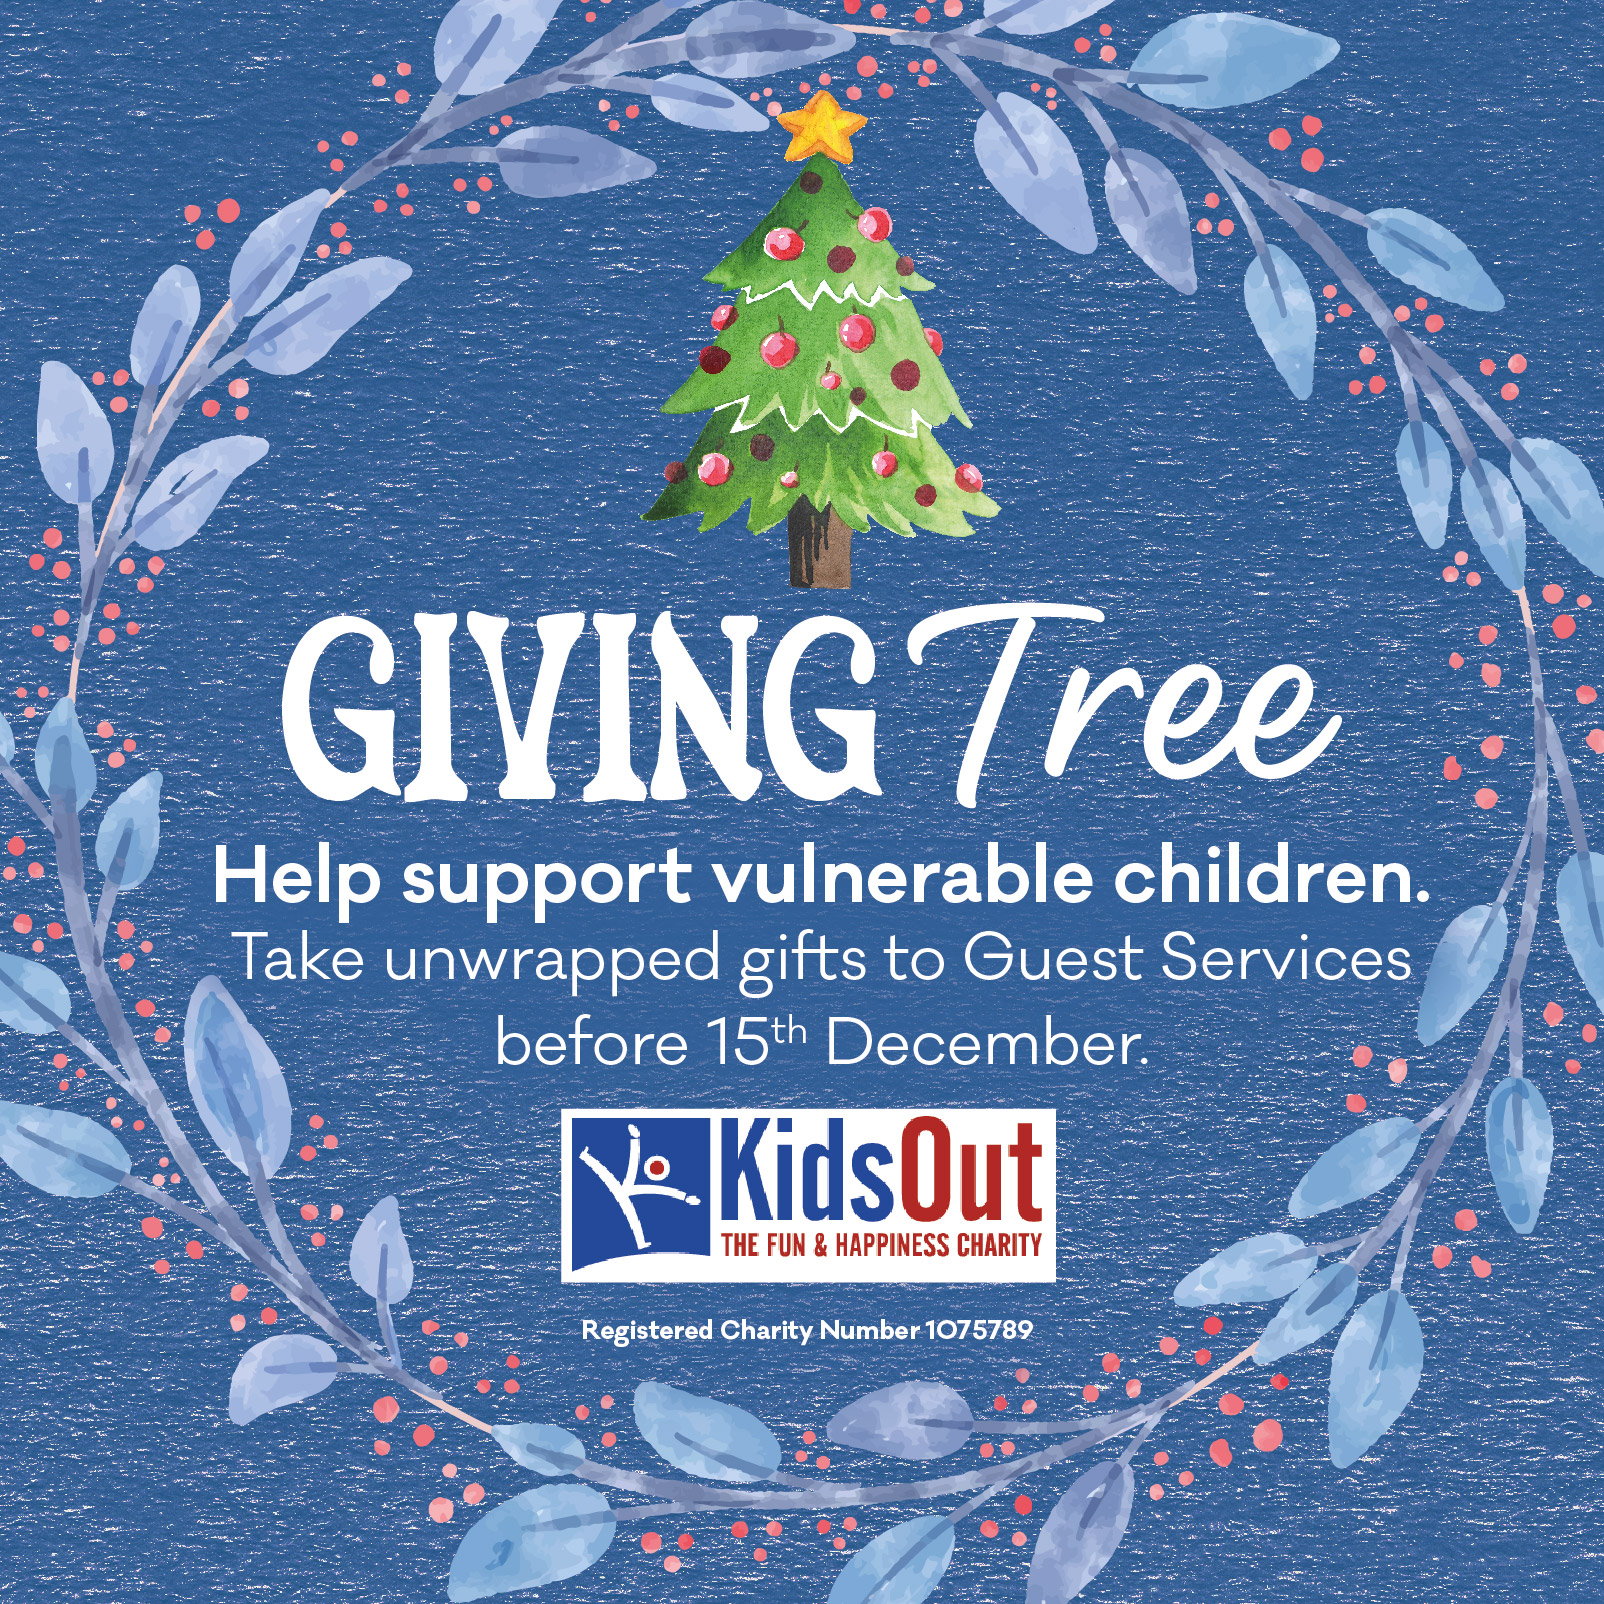 Giving Tree in association with KidsOut